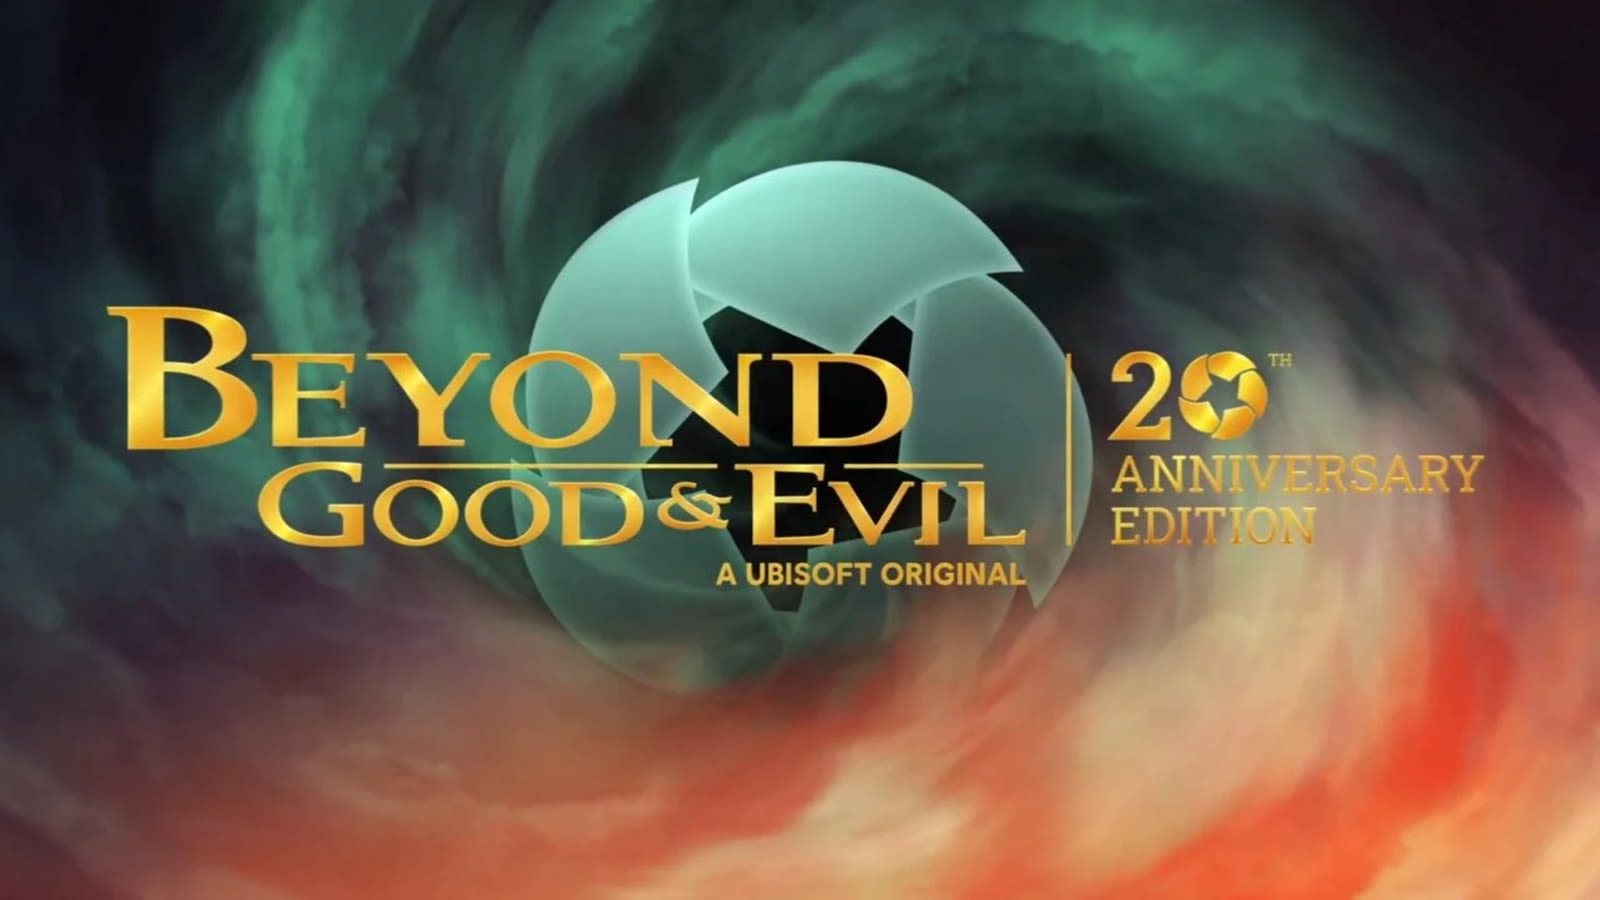 Beyond Good & Evil 20th Anniversary Edition releases next week on consoles & PC